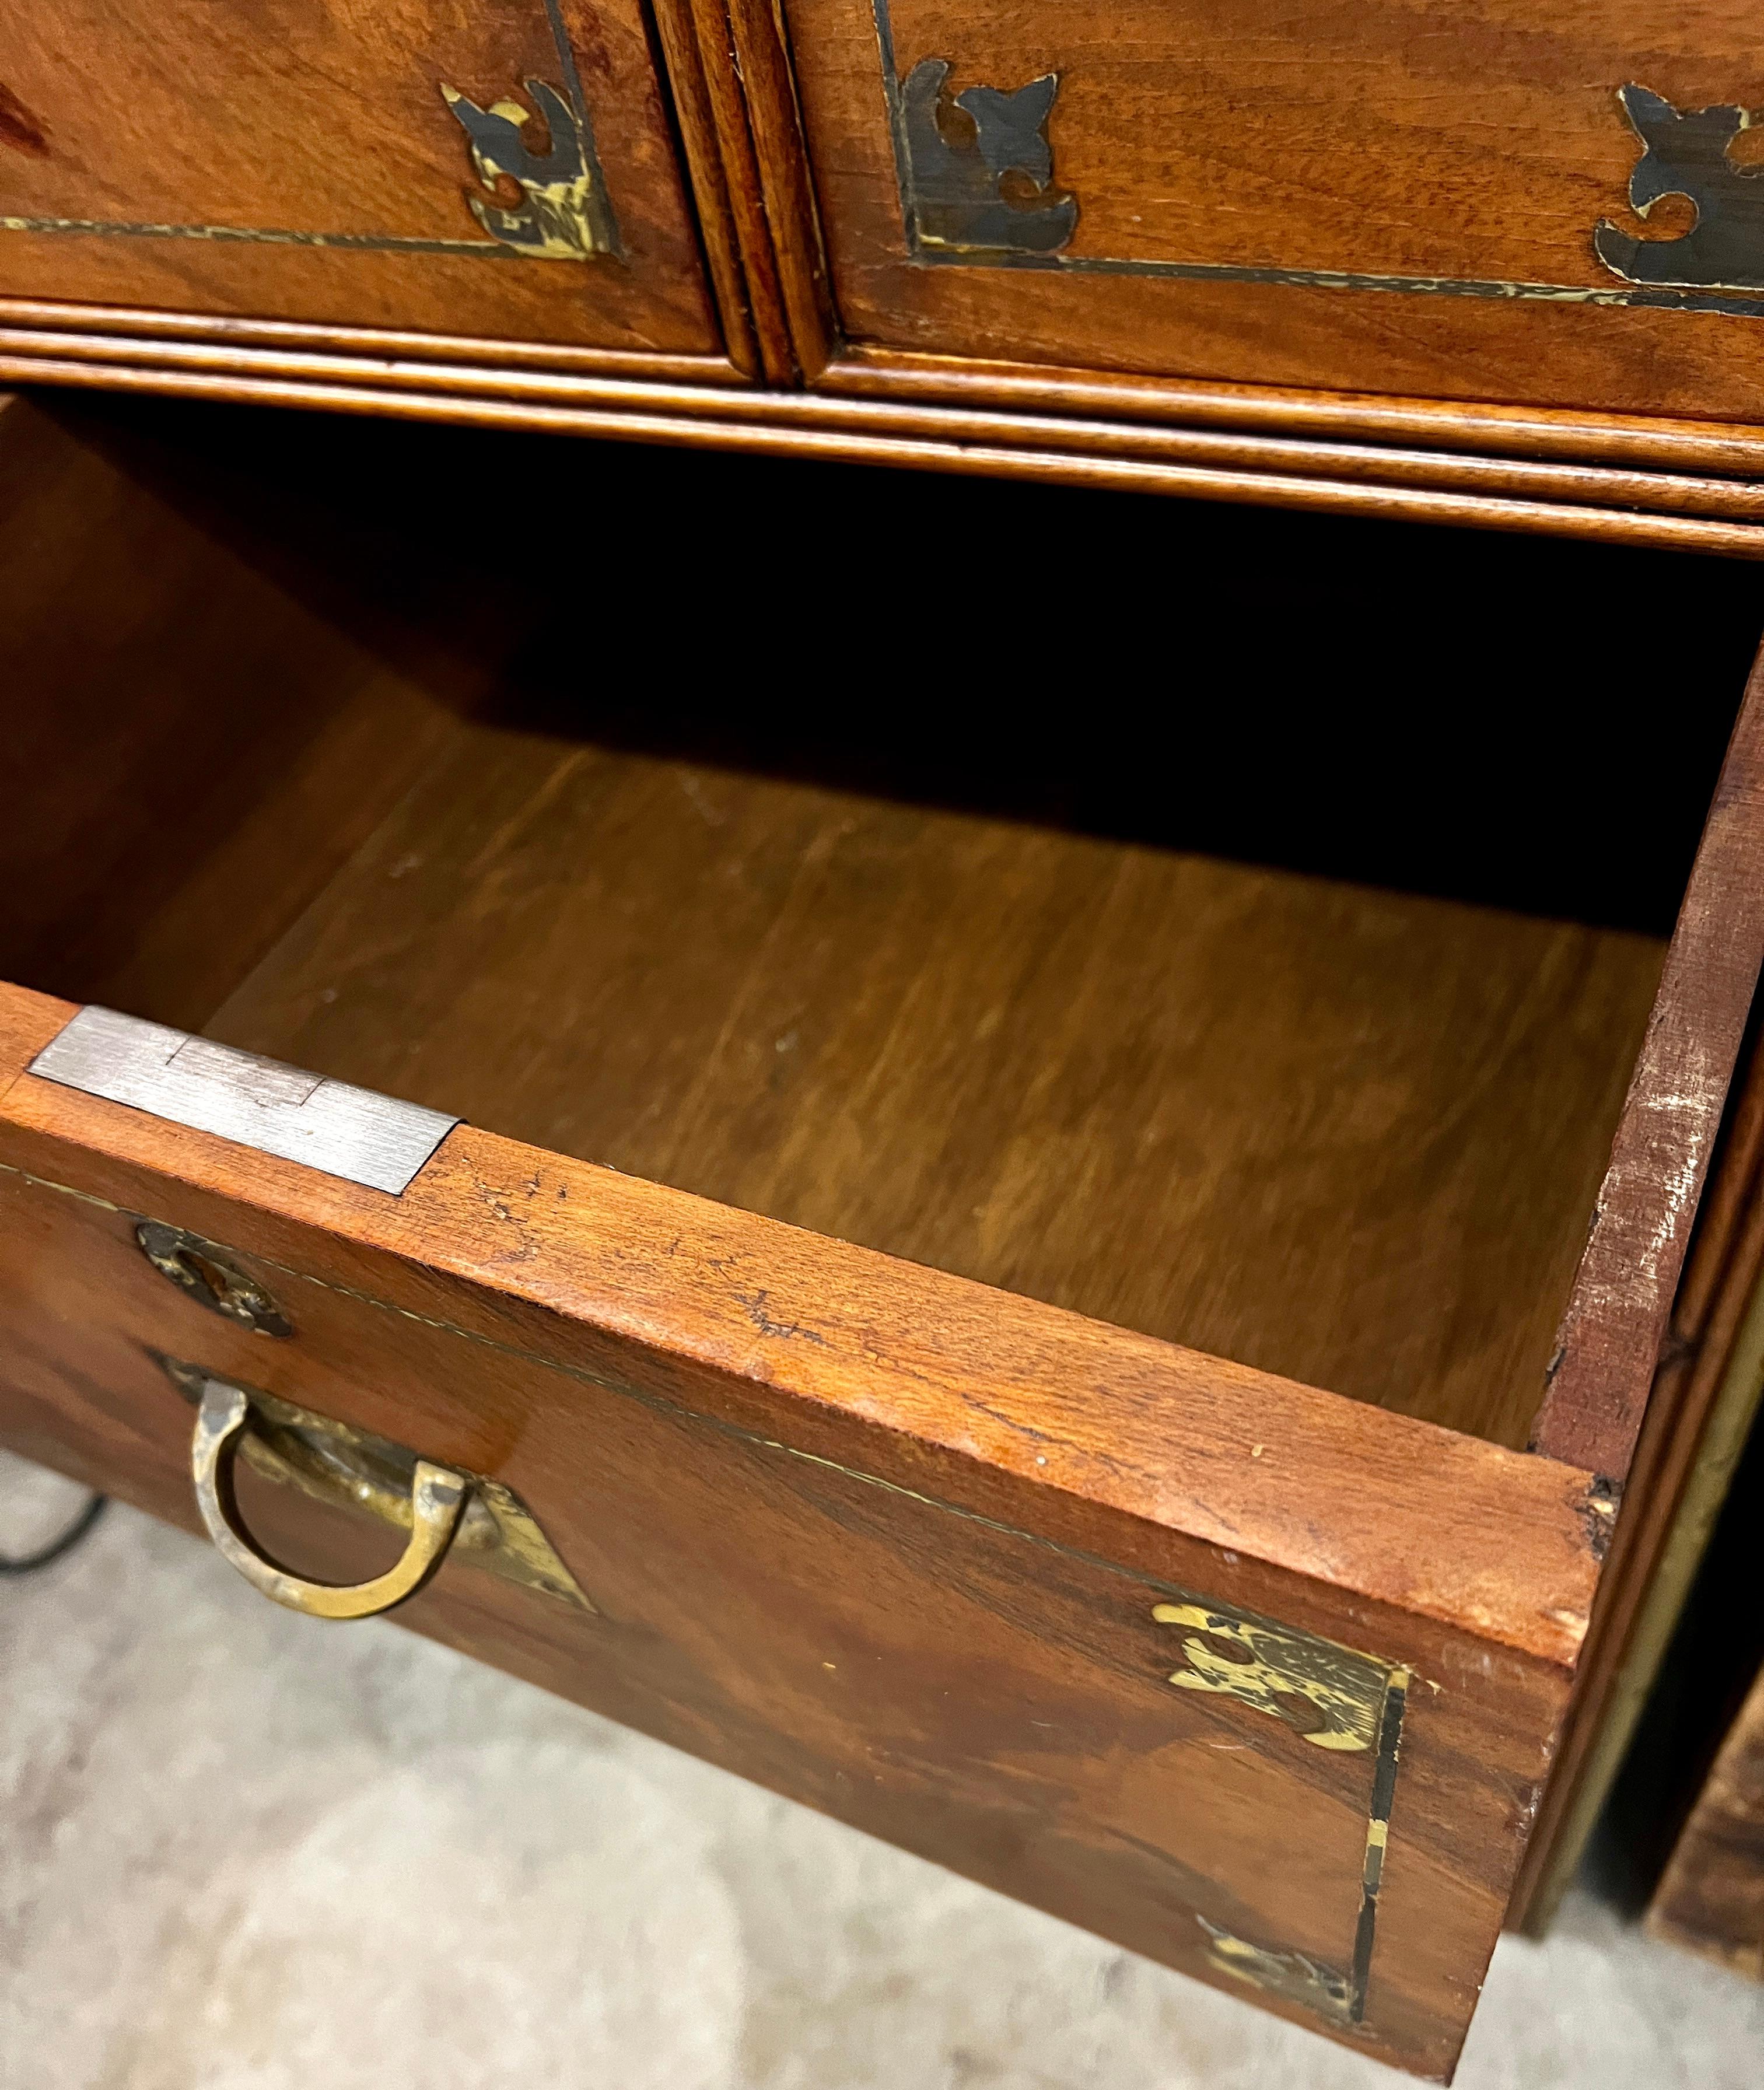 Anglo Raj Regency Campaign Chest with Desk Trimmed in Brass Banding Accents 1811 In Good Condition For Sale In Los Angeles, CA